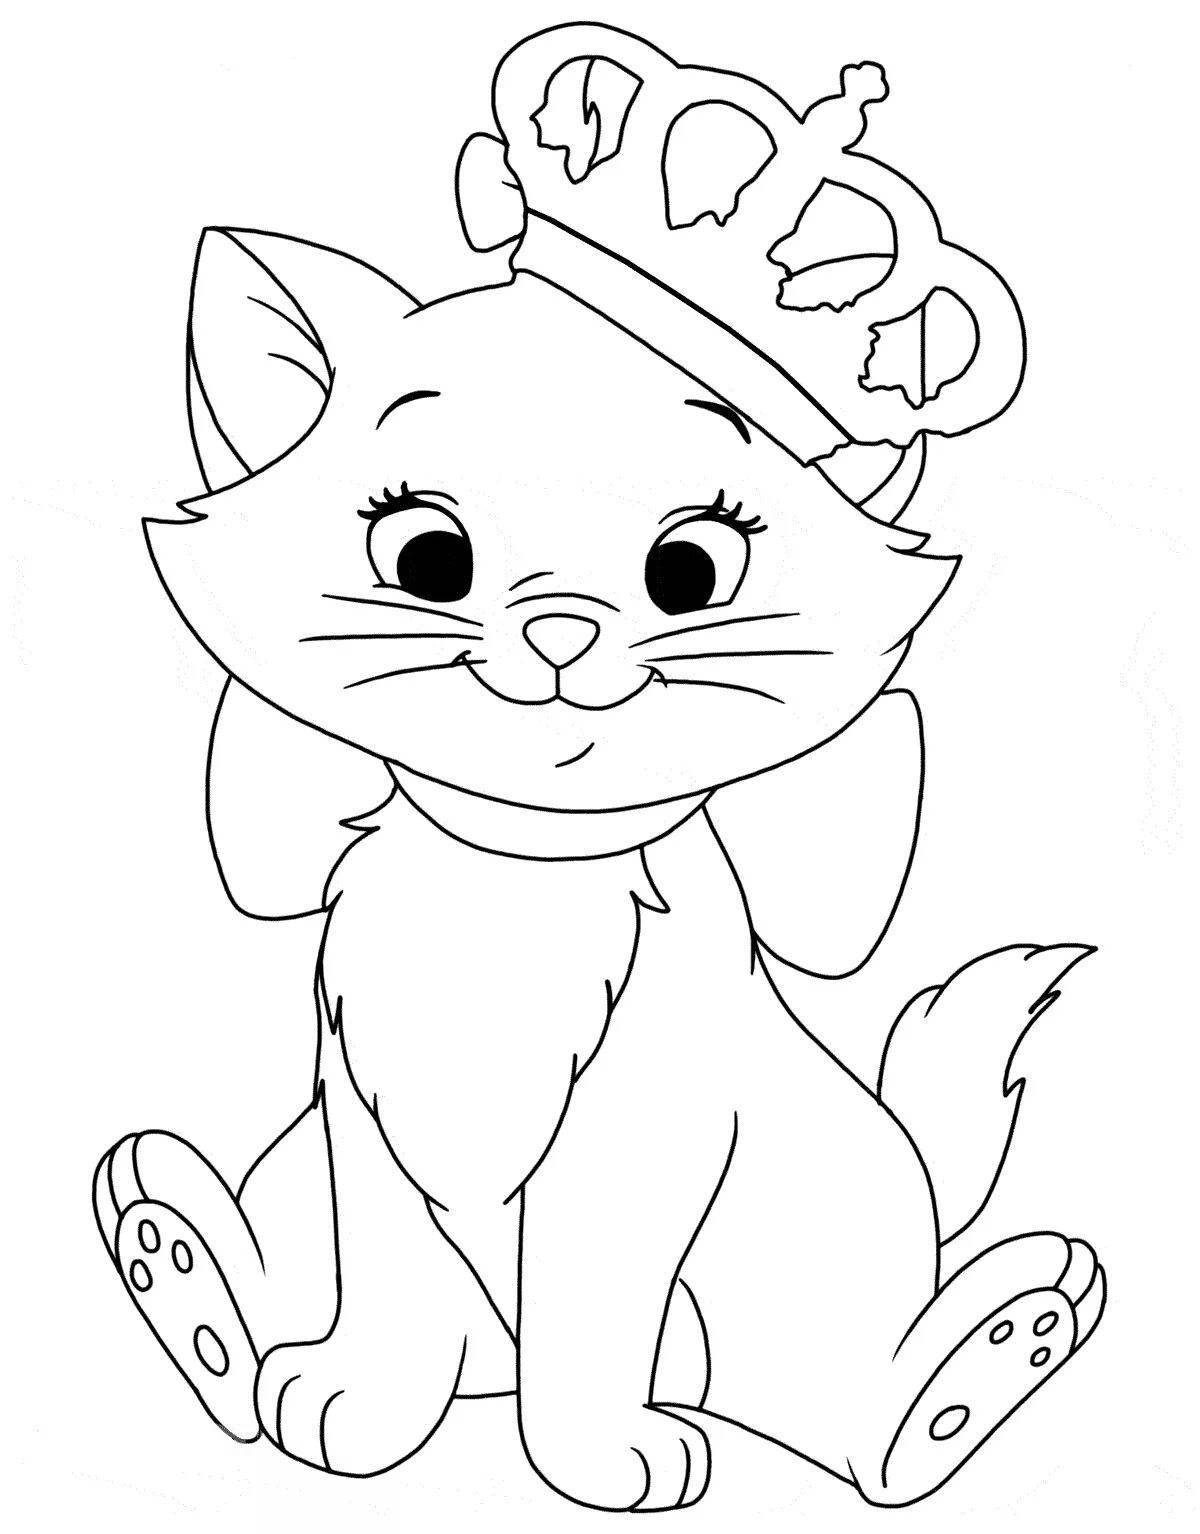 Coloring page elegant cat with a crown